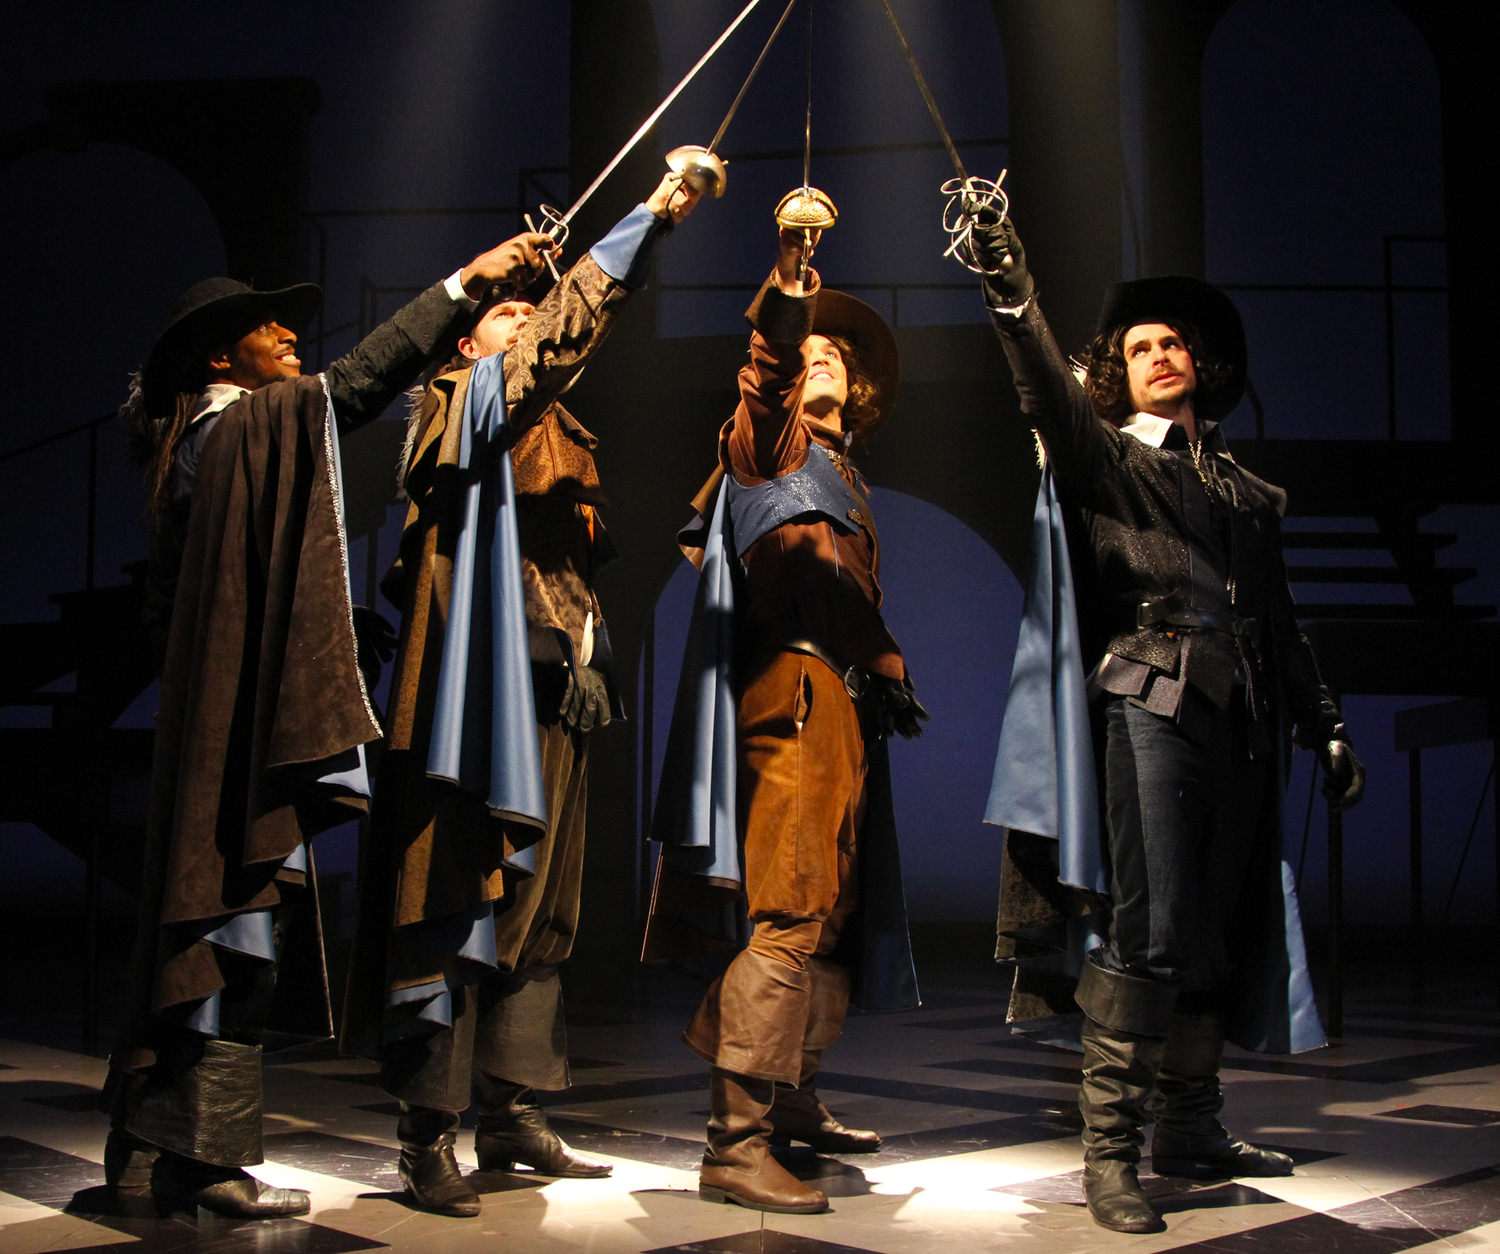 “All for One” L to R: Thomas Brazzle (Athos), Anthony J. Goes (Porthos), Will Haden (D’Artagnan) and James Jelkin (Aramis) star in The Three Musketeers at Connecticut Repertory Theatre from November 21 through December 8 in the Harriet S. Jorgensen Theatre, Storrs, CT. Photo by Gerry Goodstein. 1